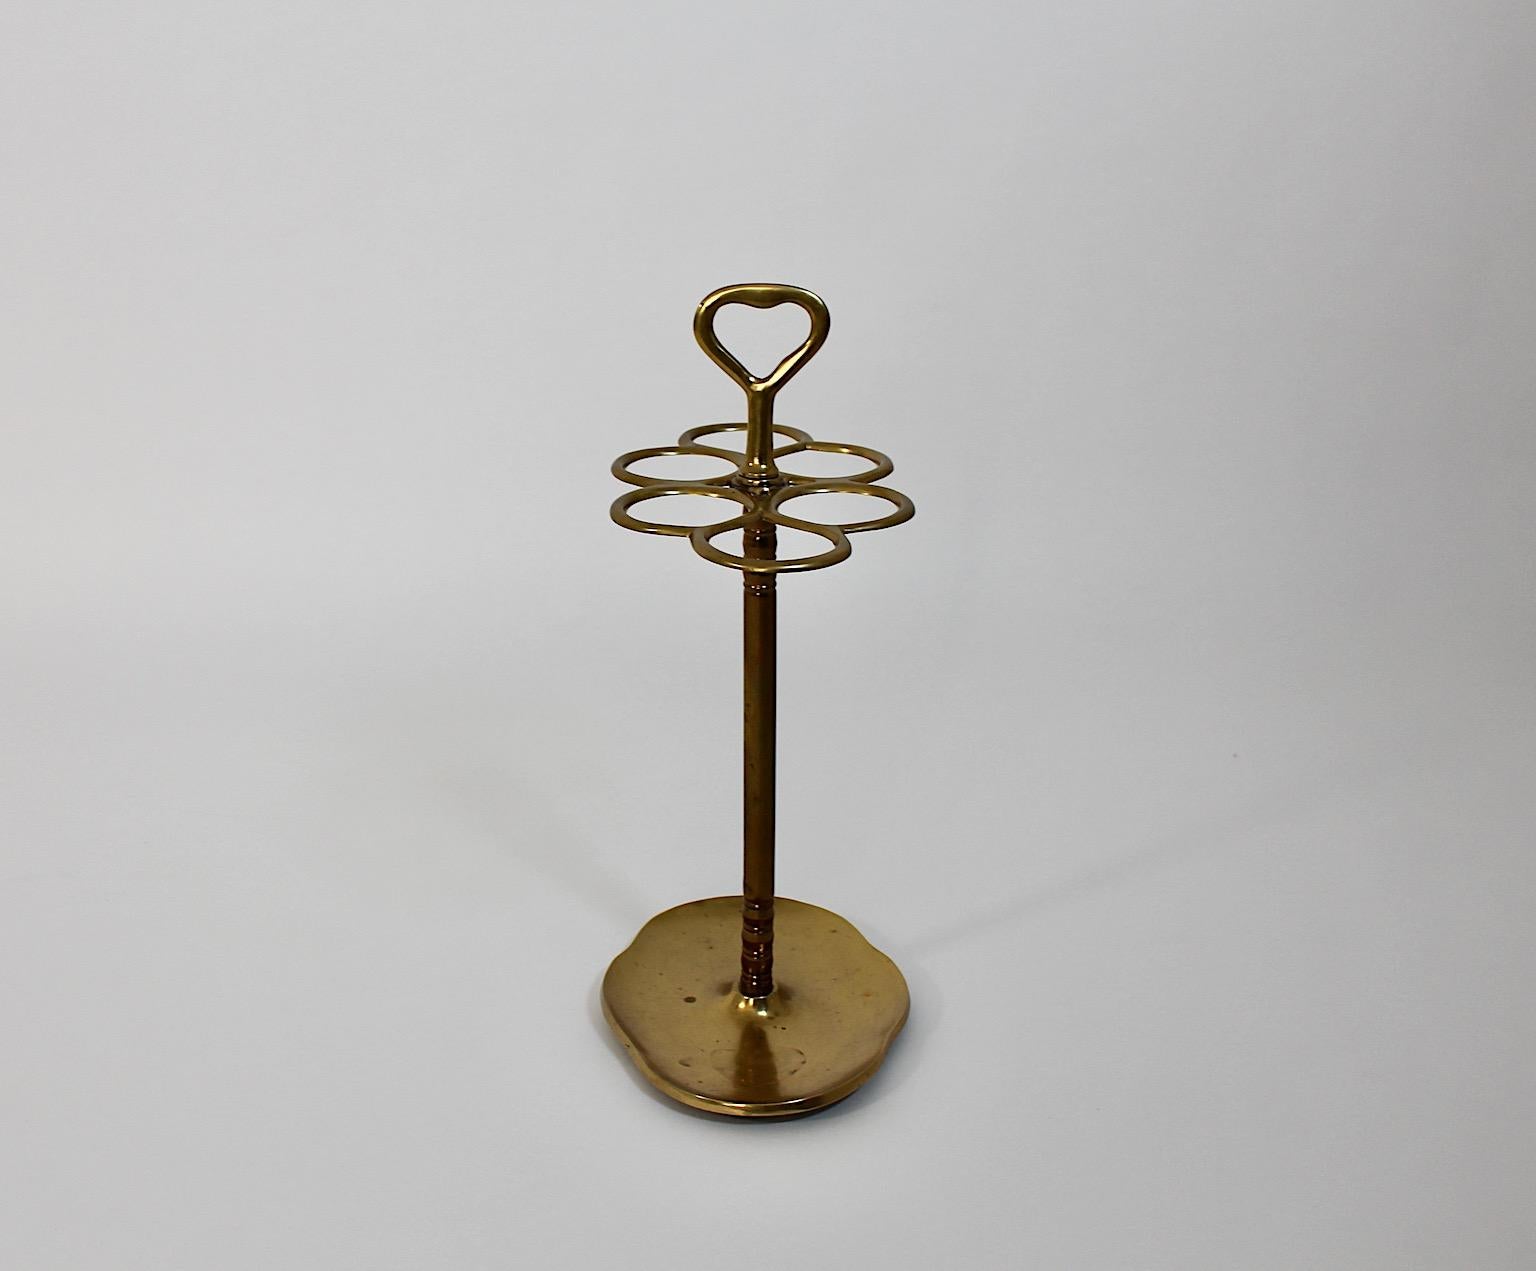 Hollywood Regency Style Vintage Brass Umbrella Stand Cane Holder 1970s Italy For Sale 3